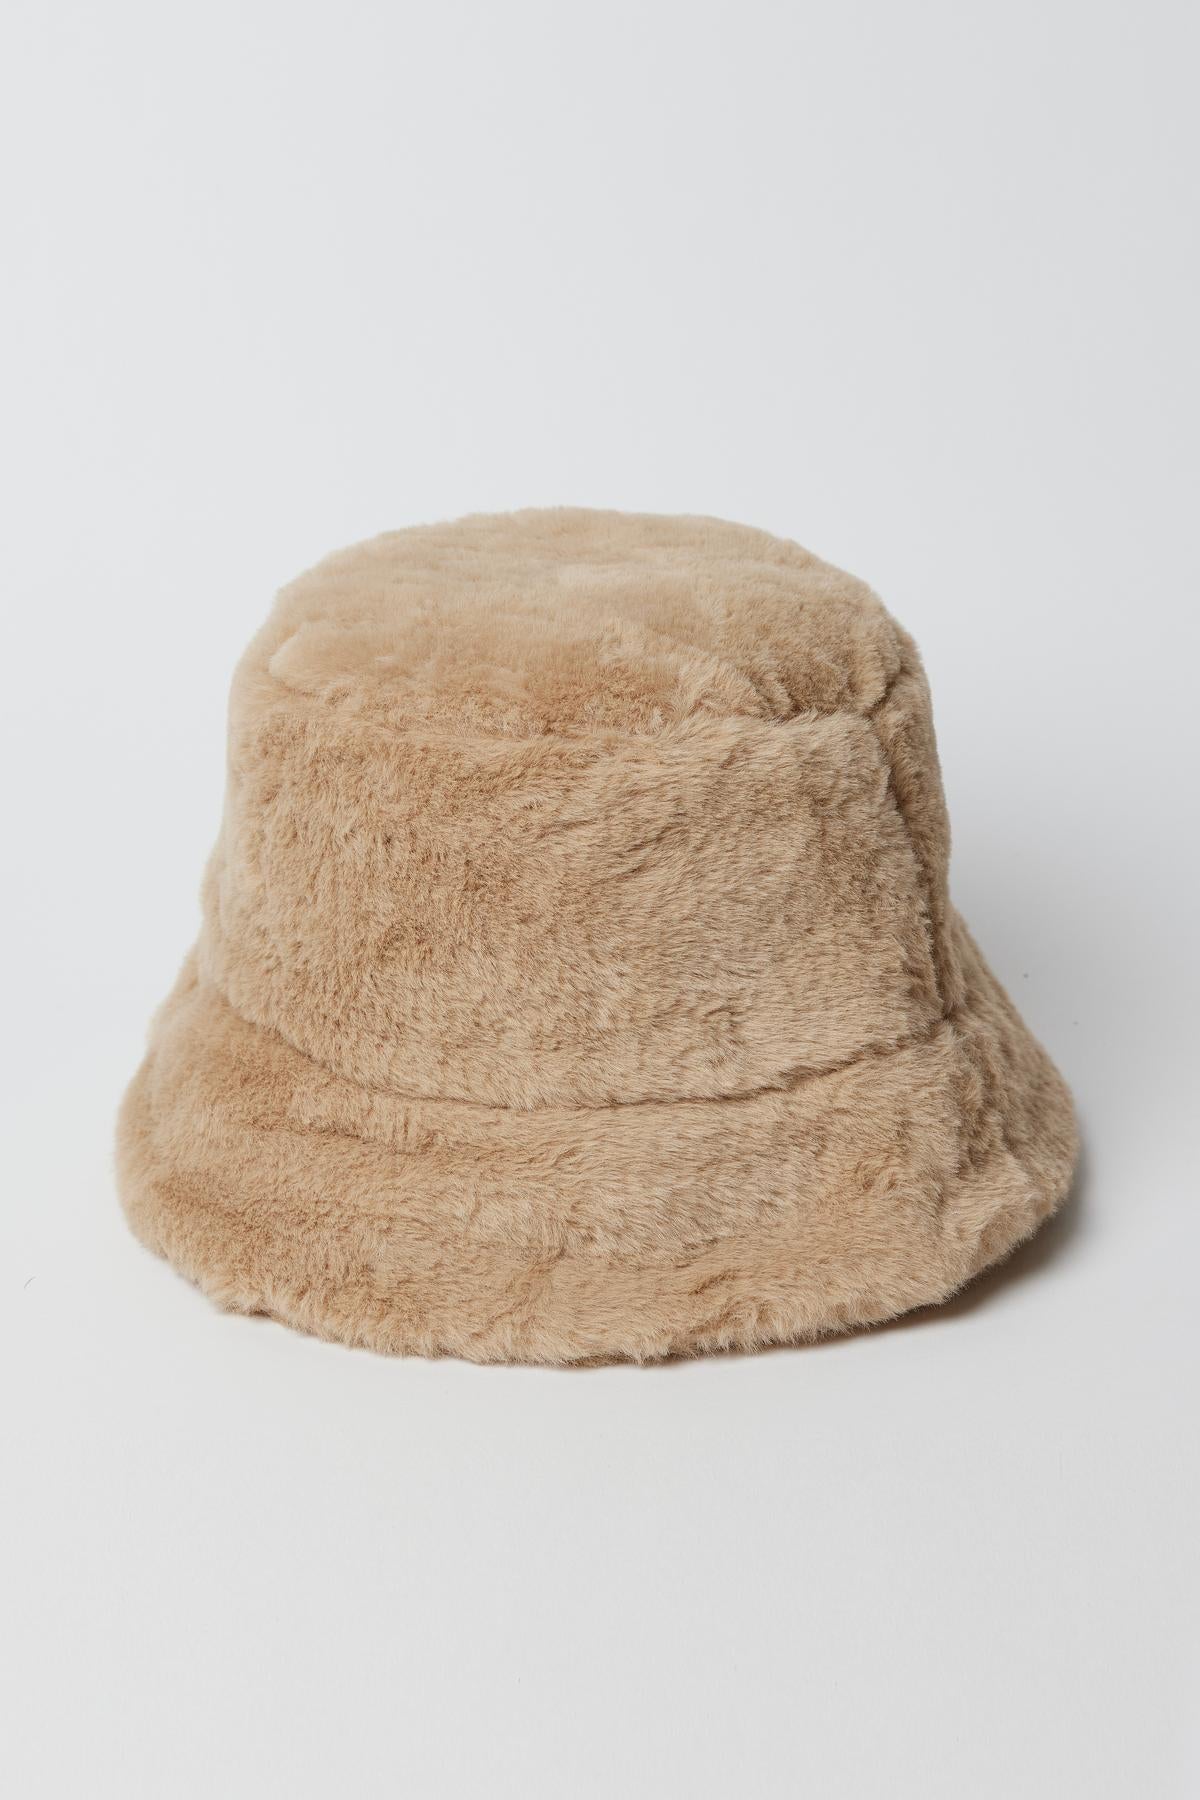 A Velvet by Graham & Spencer FAUX FUR BUCKET HAT on a white surface.-35211049697473